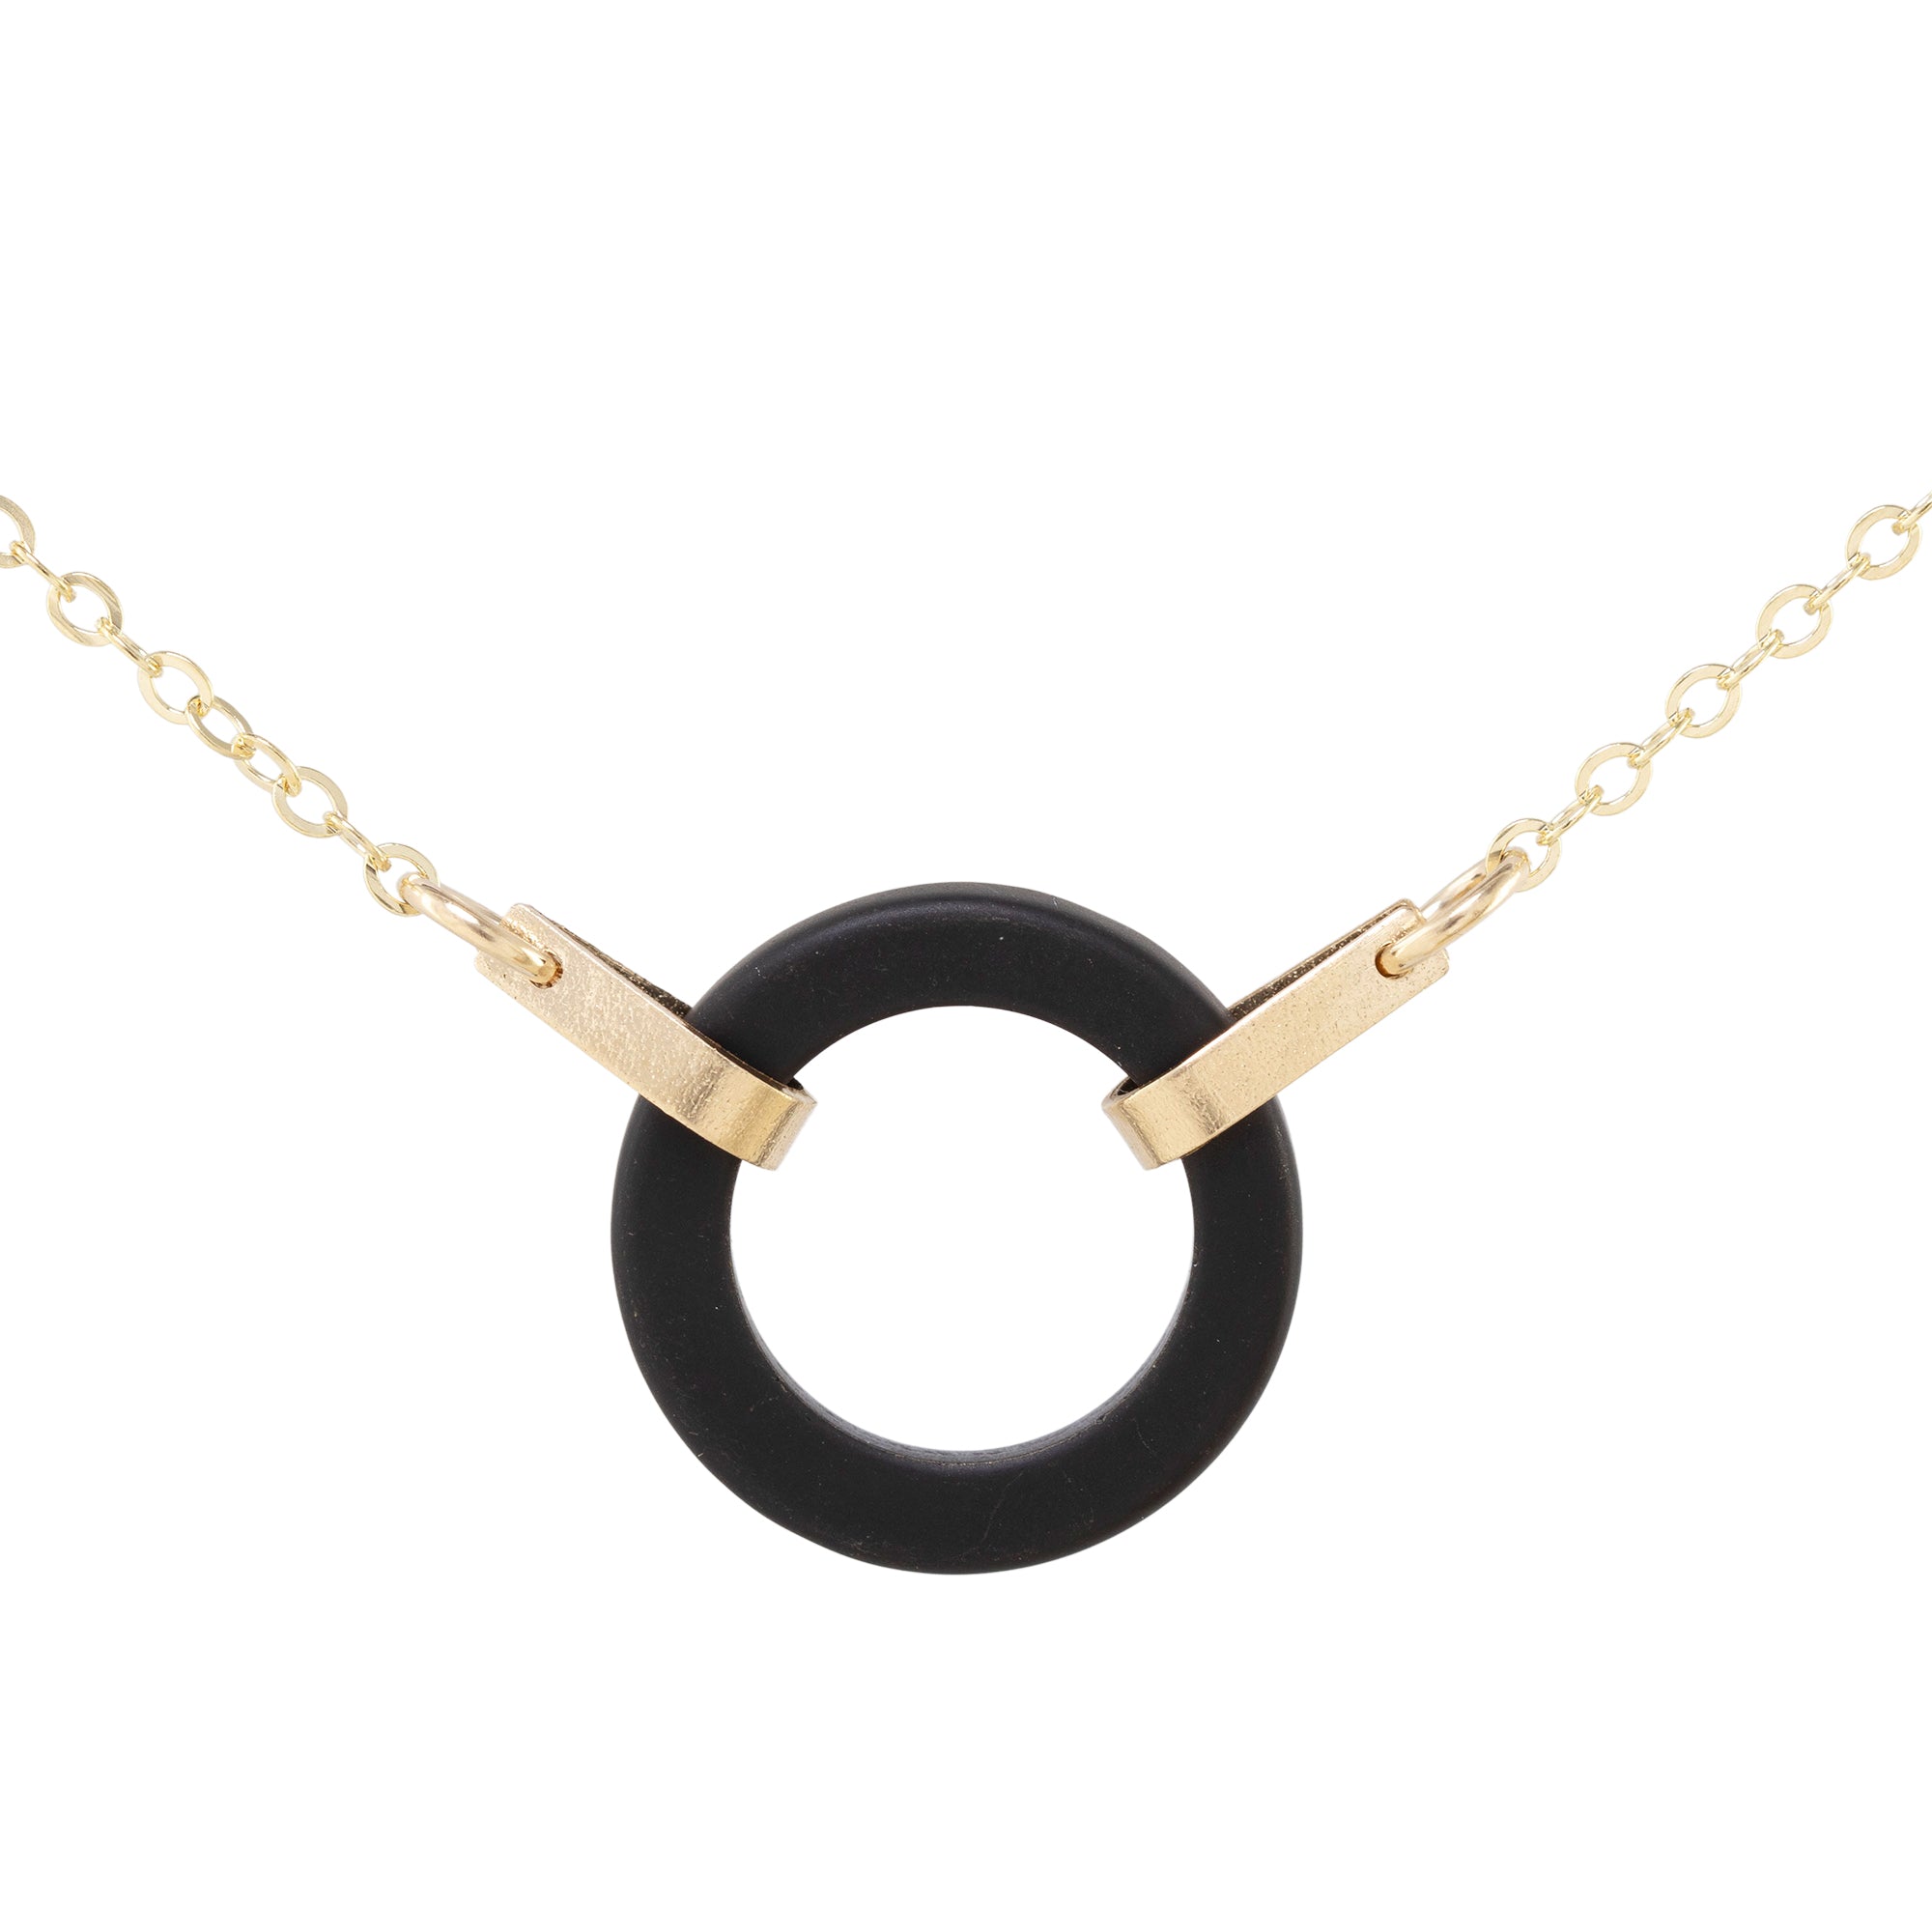 Matte Black Recycled Glass Open Circle and 14K Gold Fill Strap Style Necklace